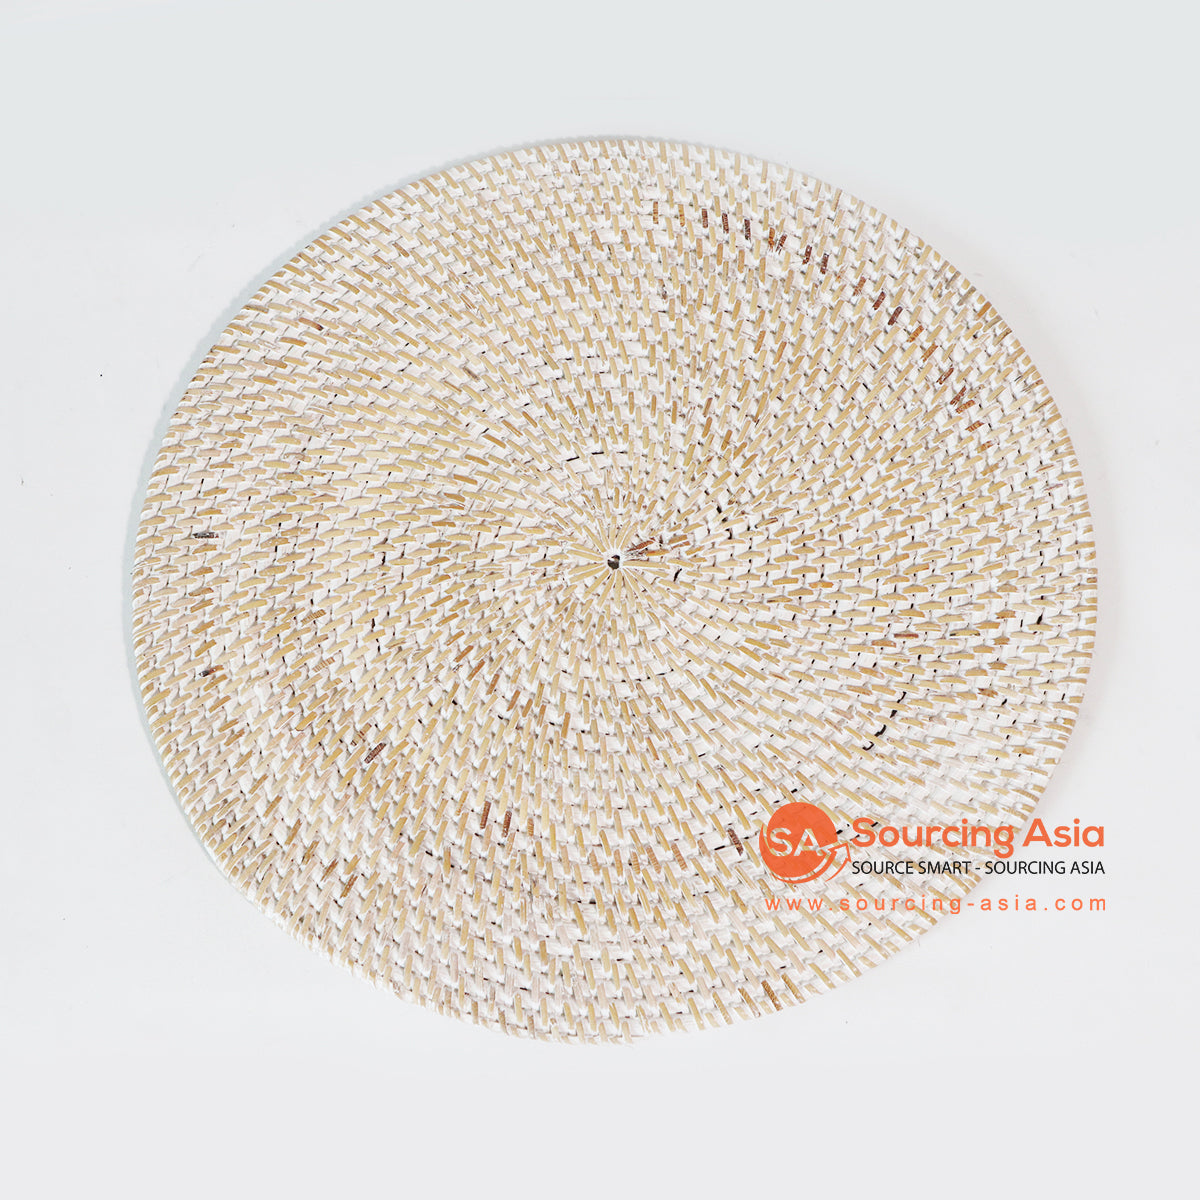 MTIC033-4 WHITE WASH WOVEN RATTAN PLACEMAT